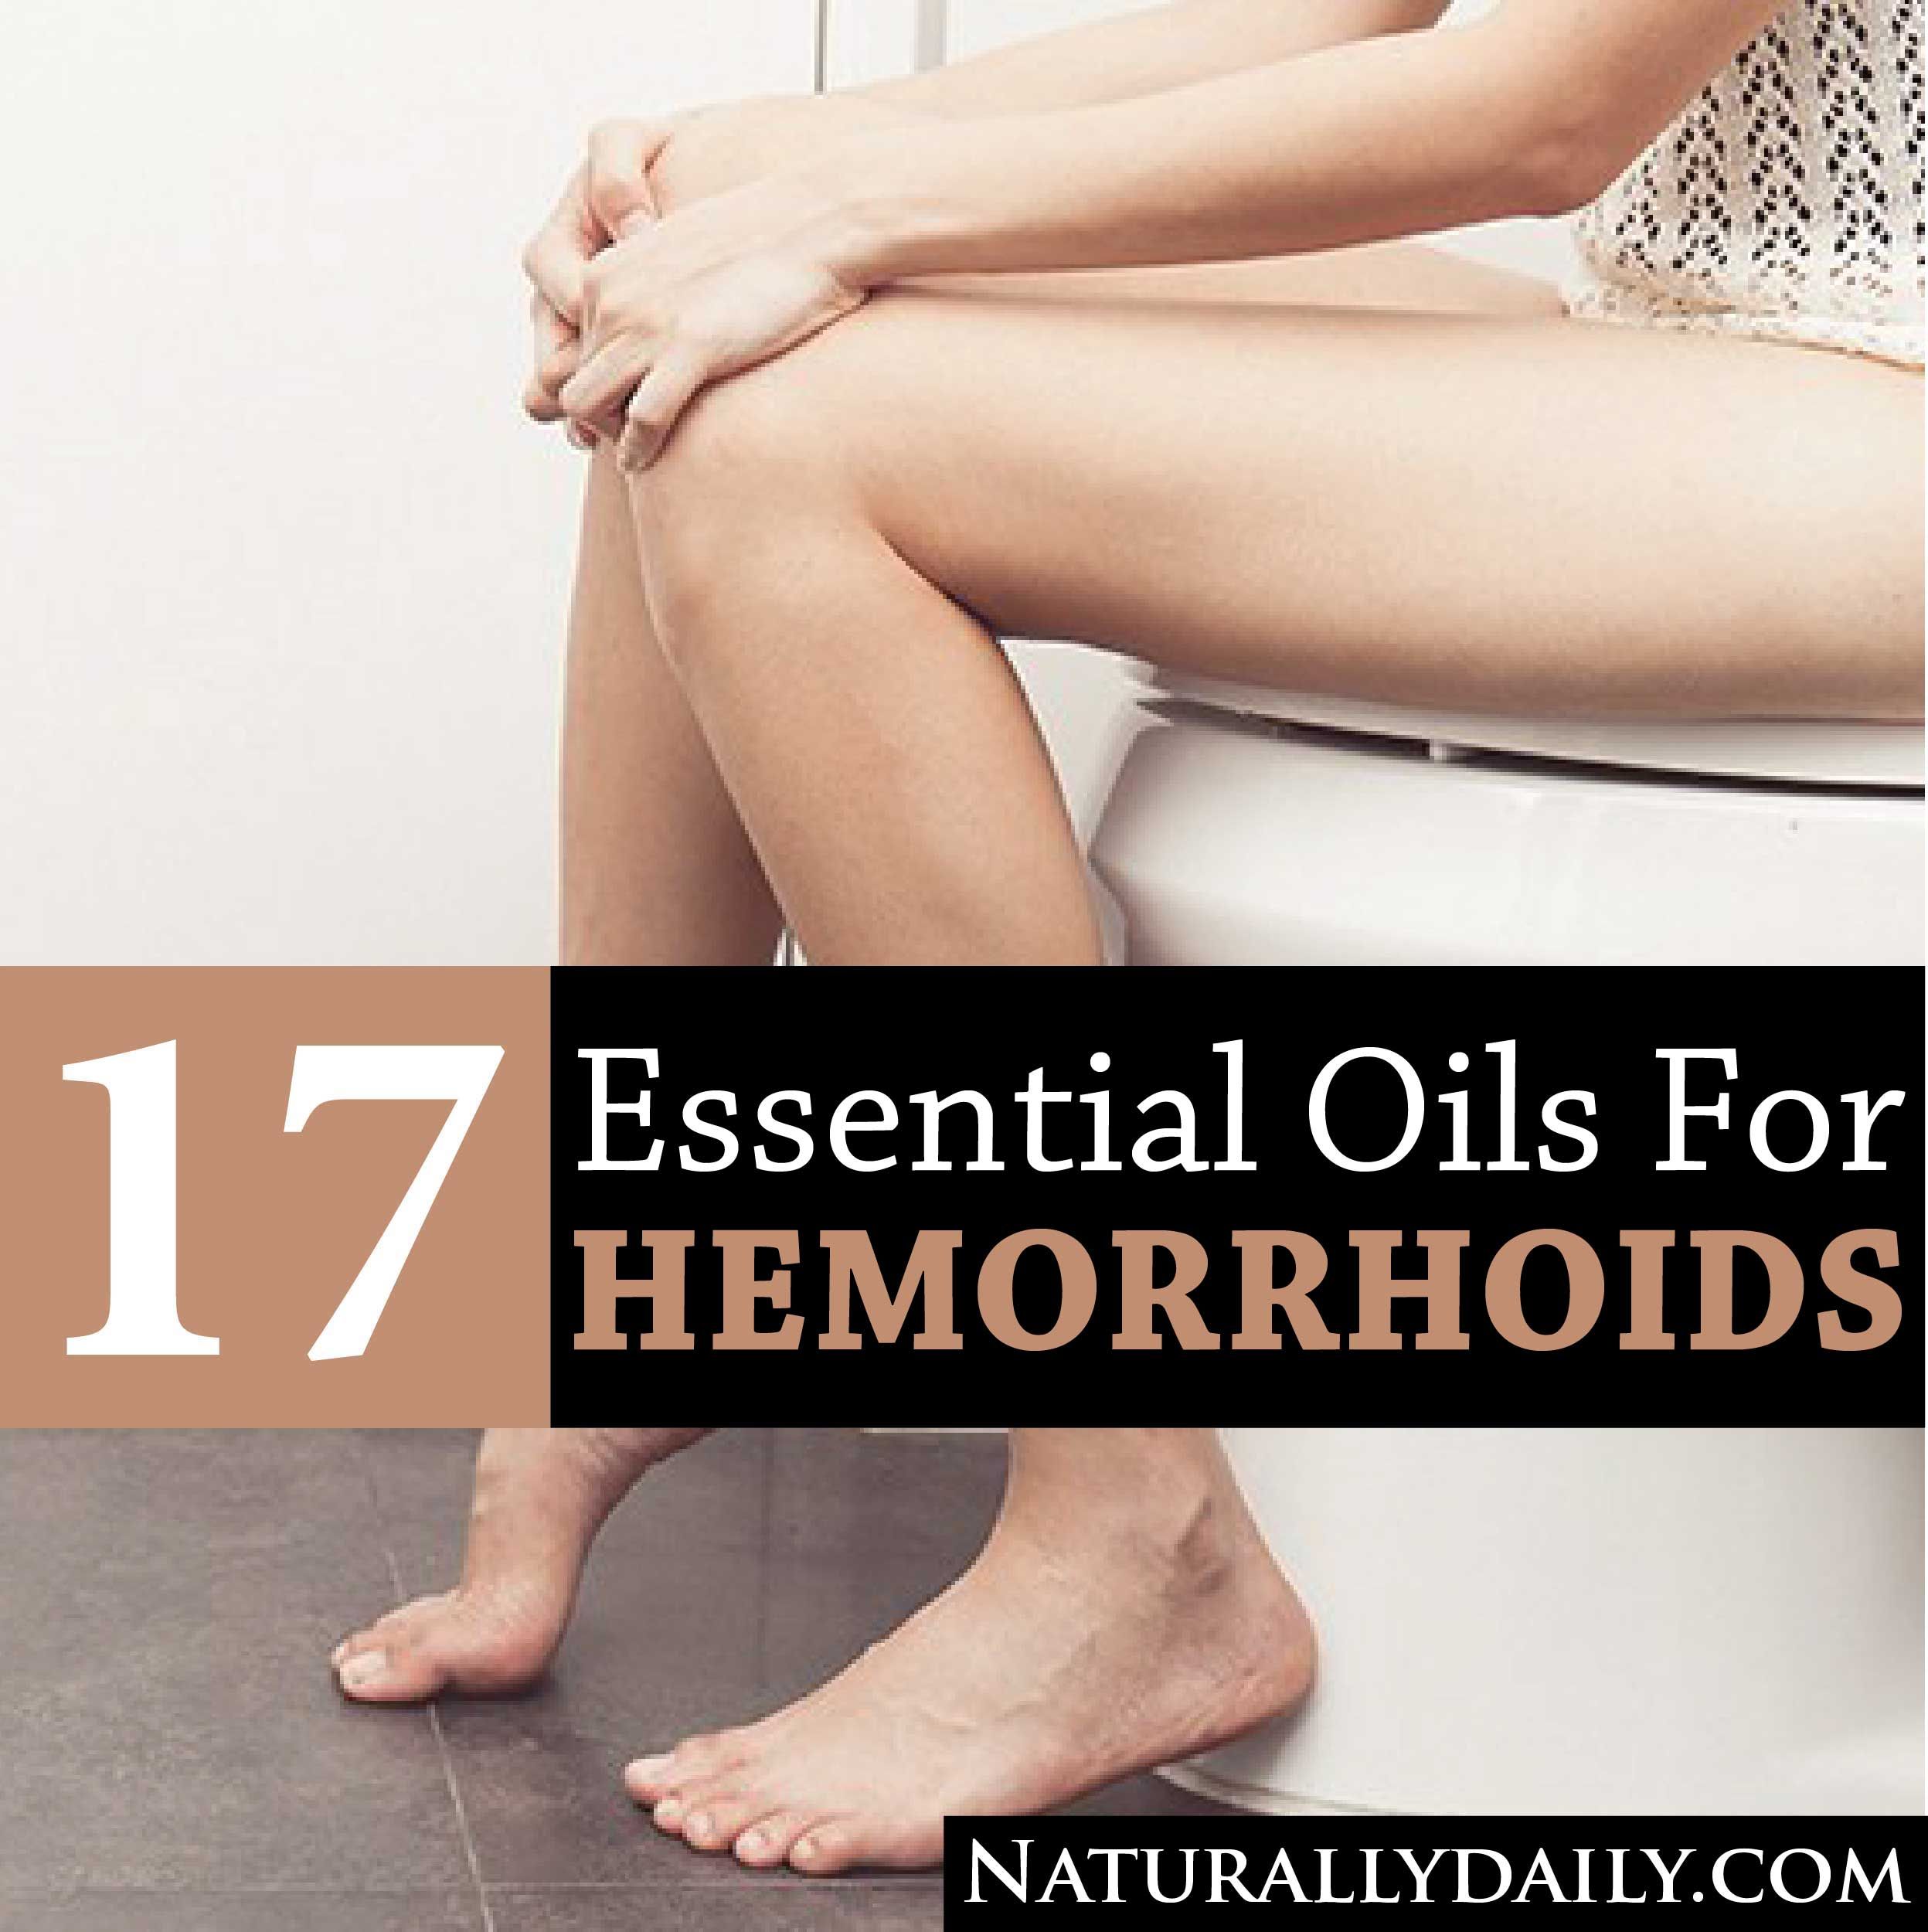 17 Essential Oils for Hemorrhoids That Really Work